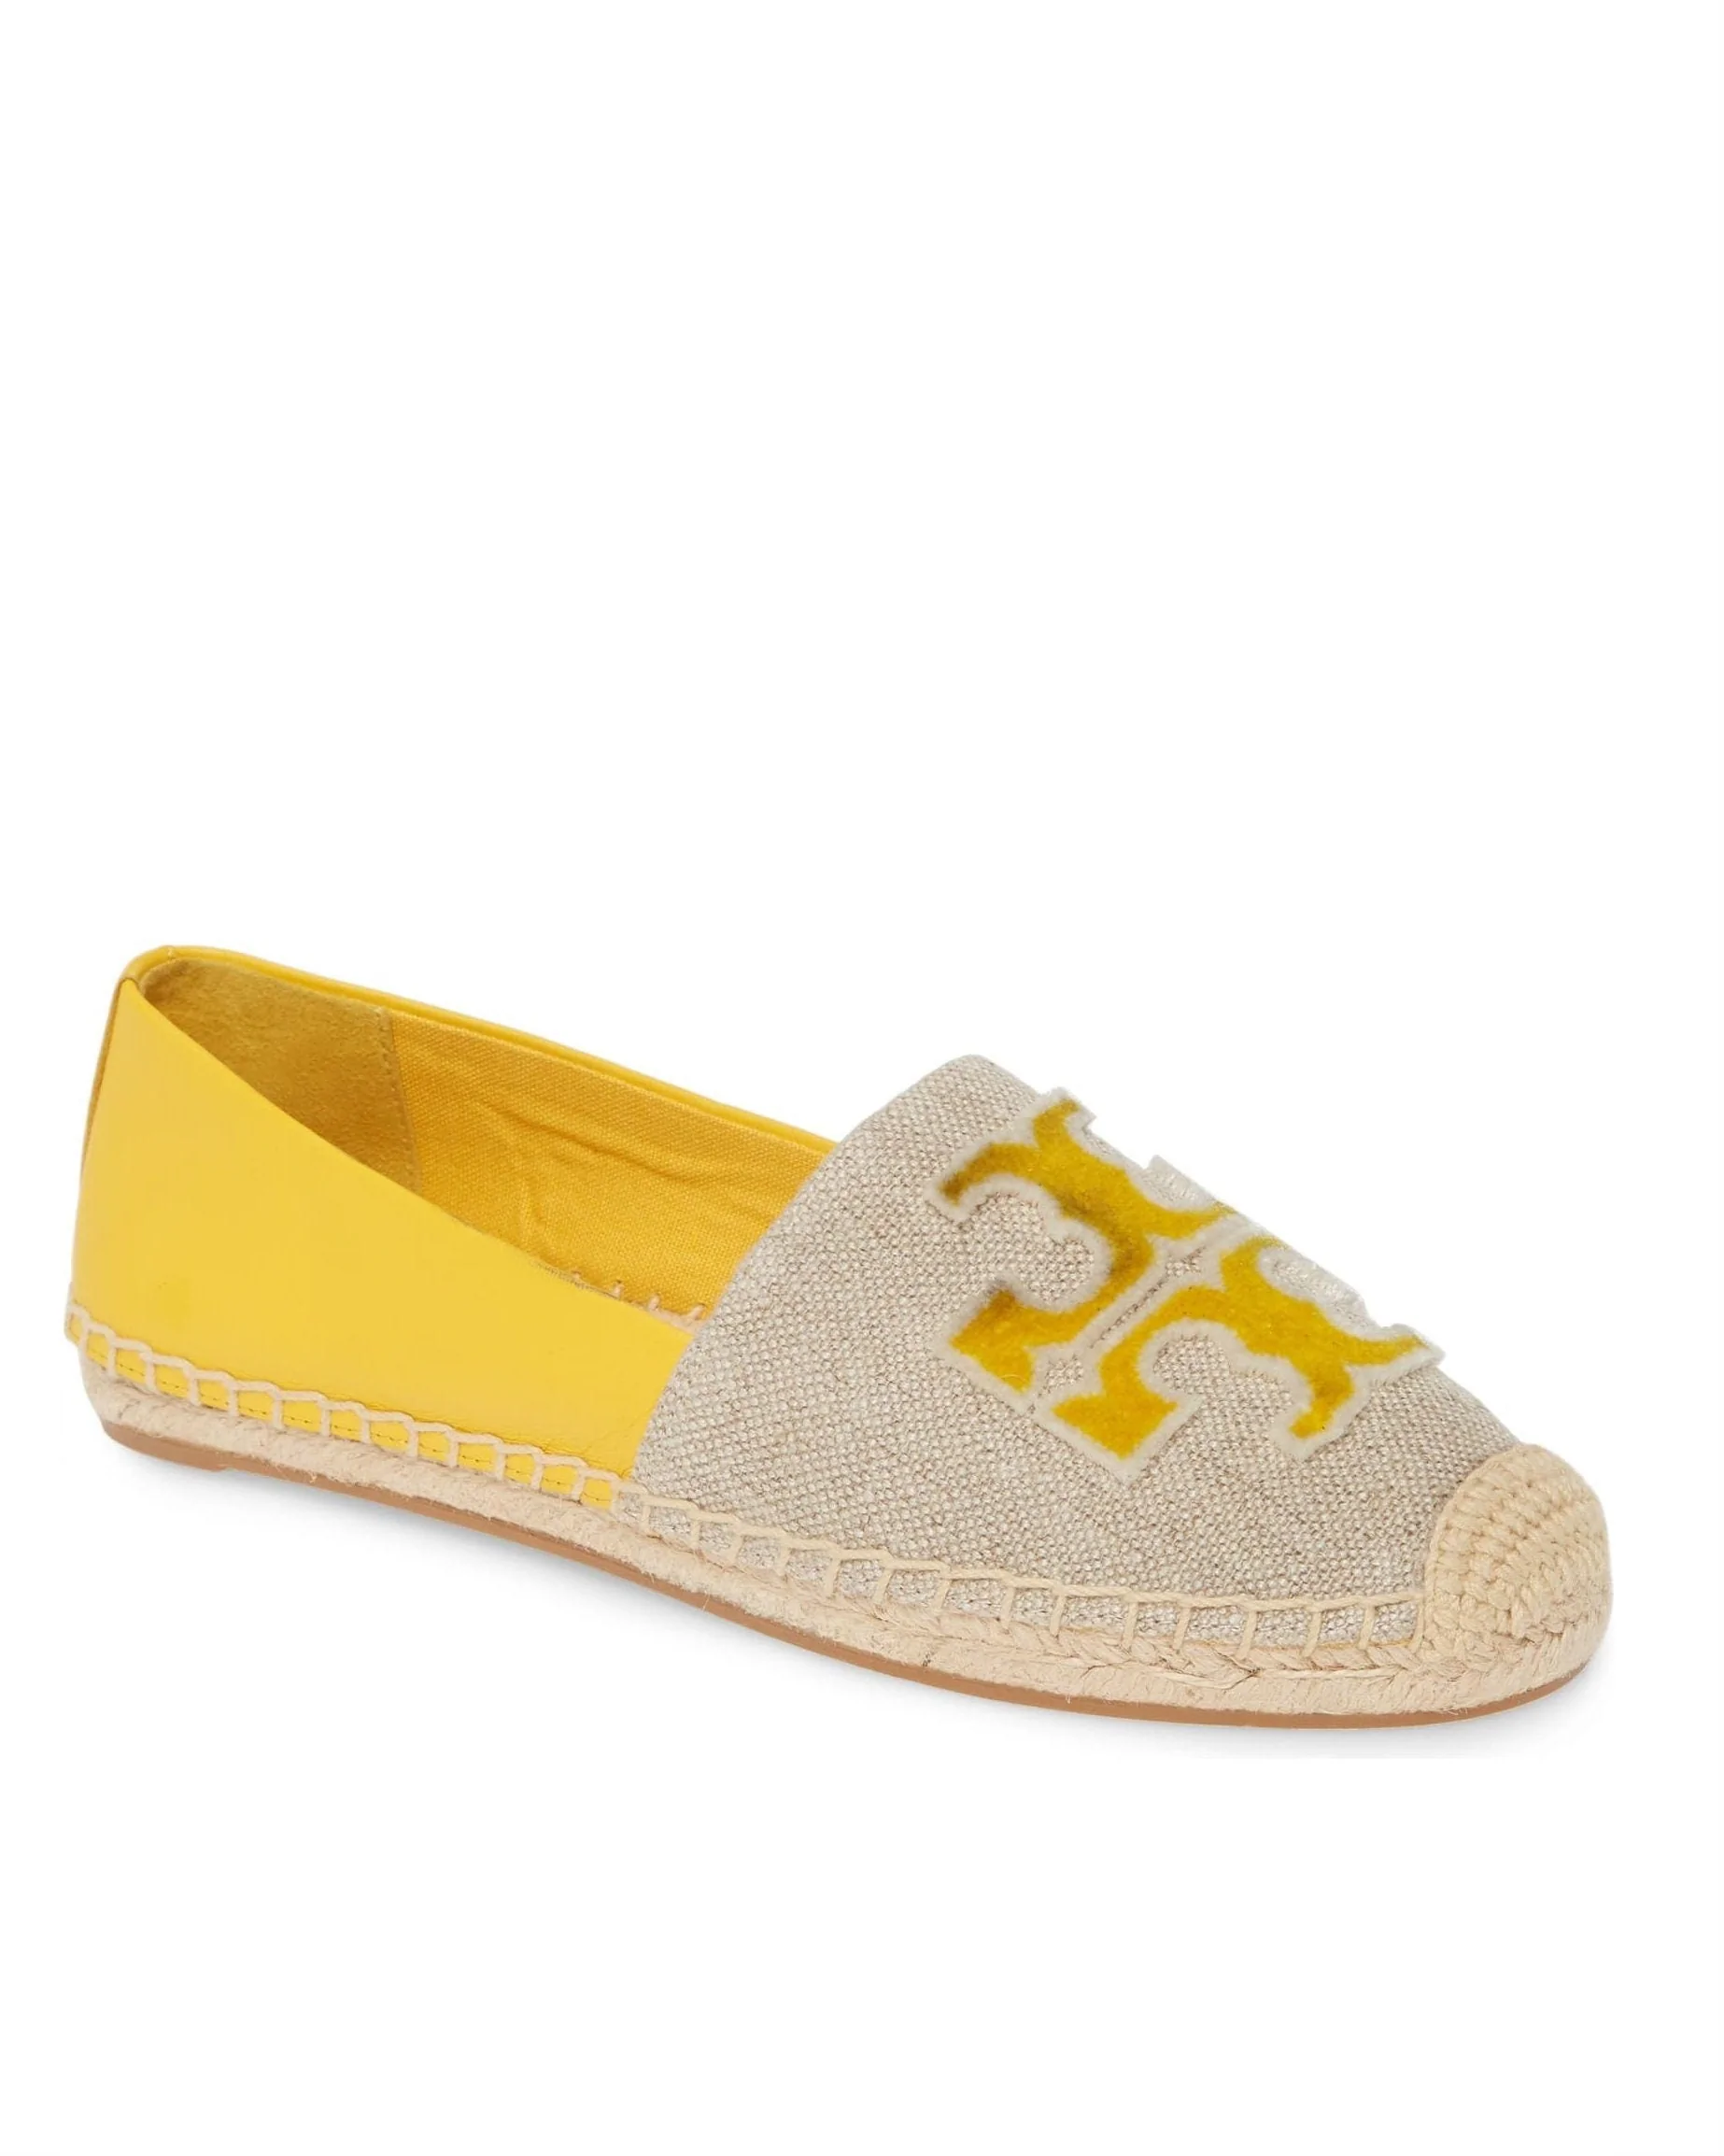 Tory Burch Ines Fil Coupe Espadrilles